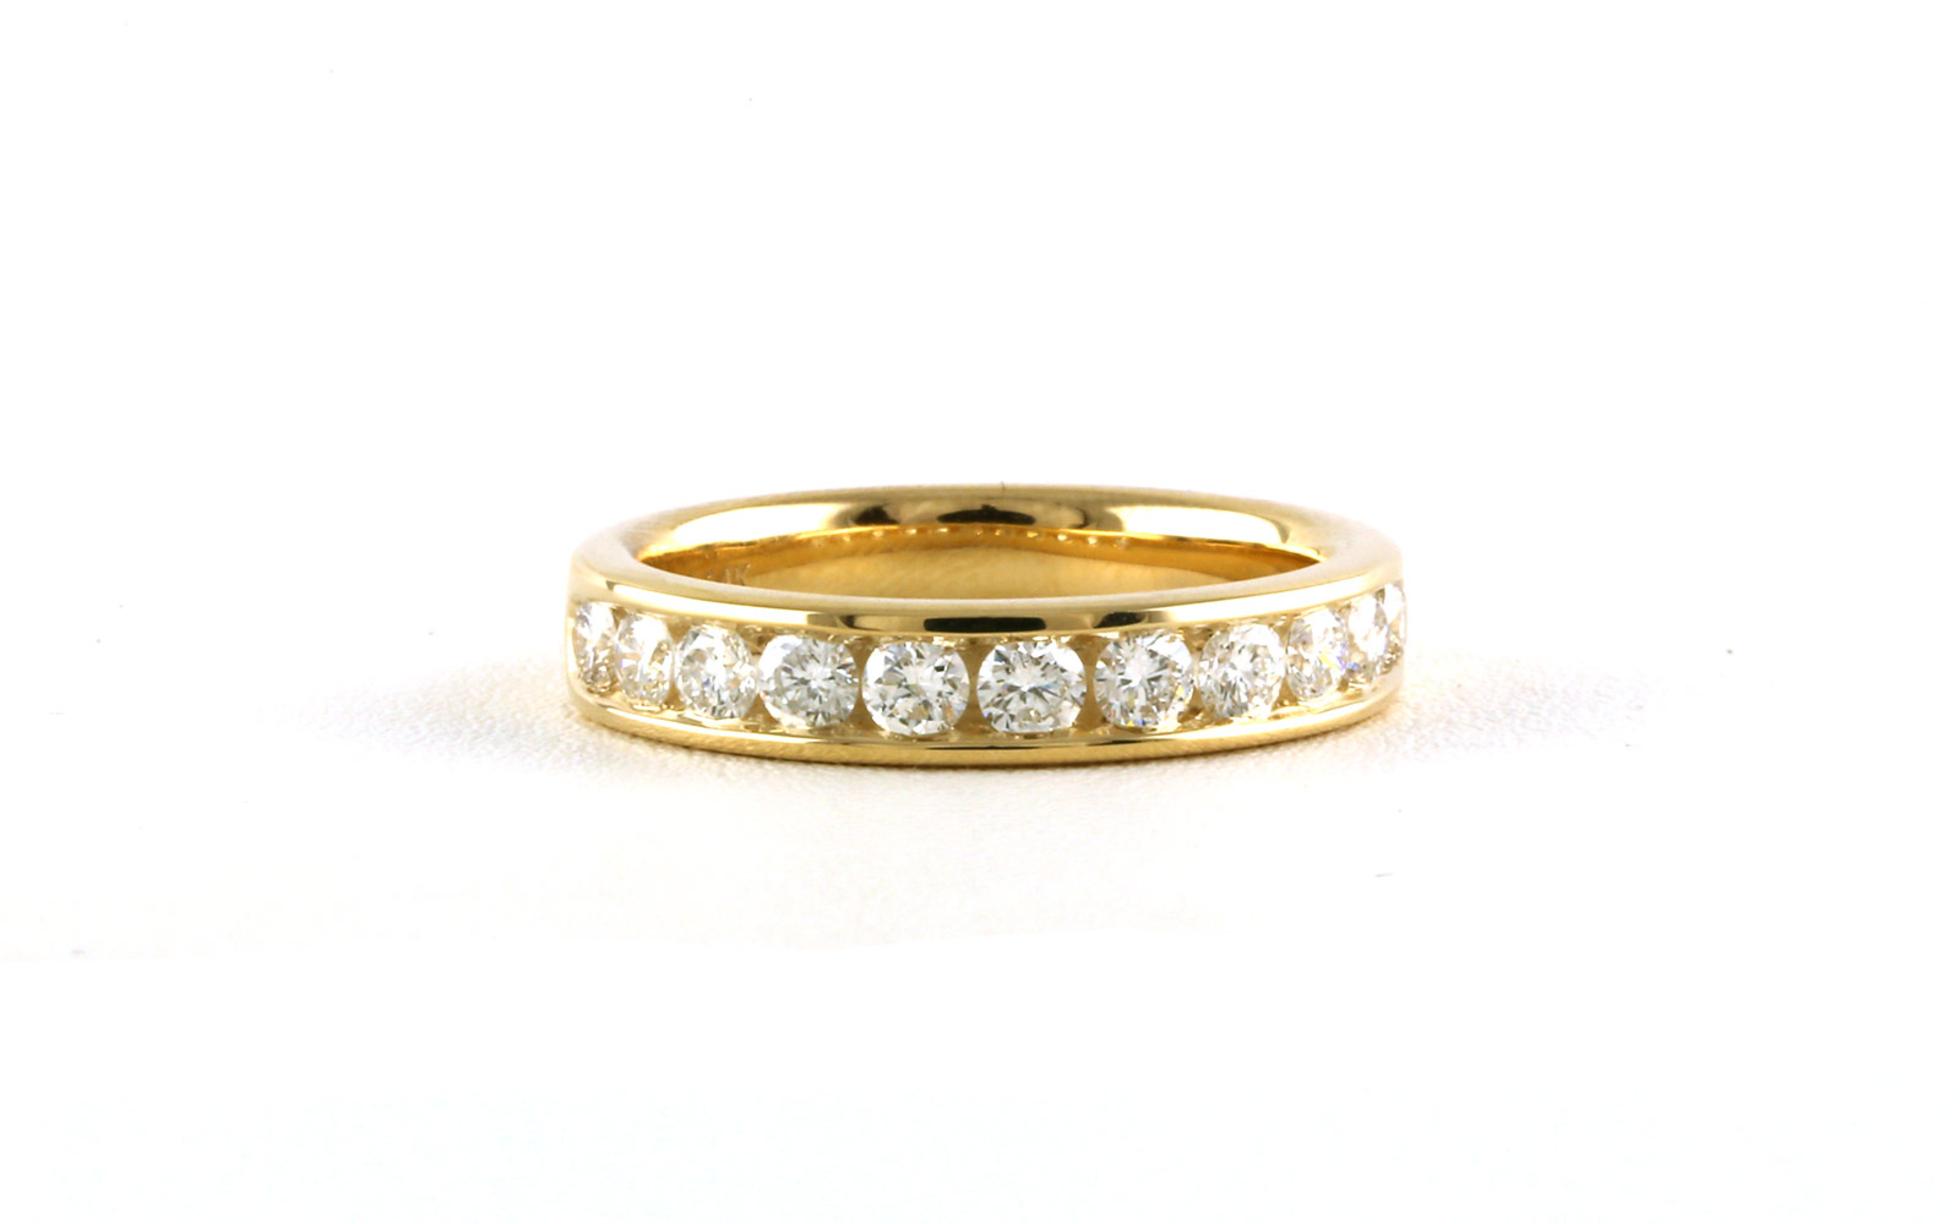 11-Stone Channel-set Wedding Band with Diamonds in Yellow Gold (0.75cts TWT)